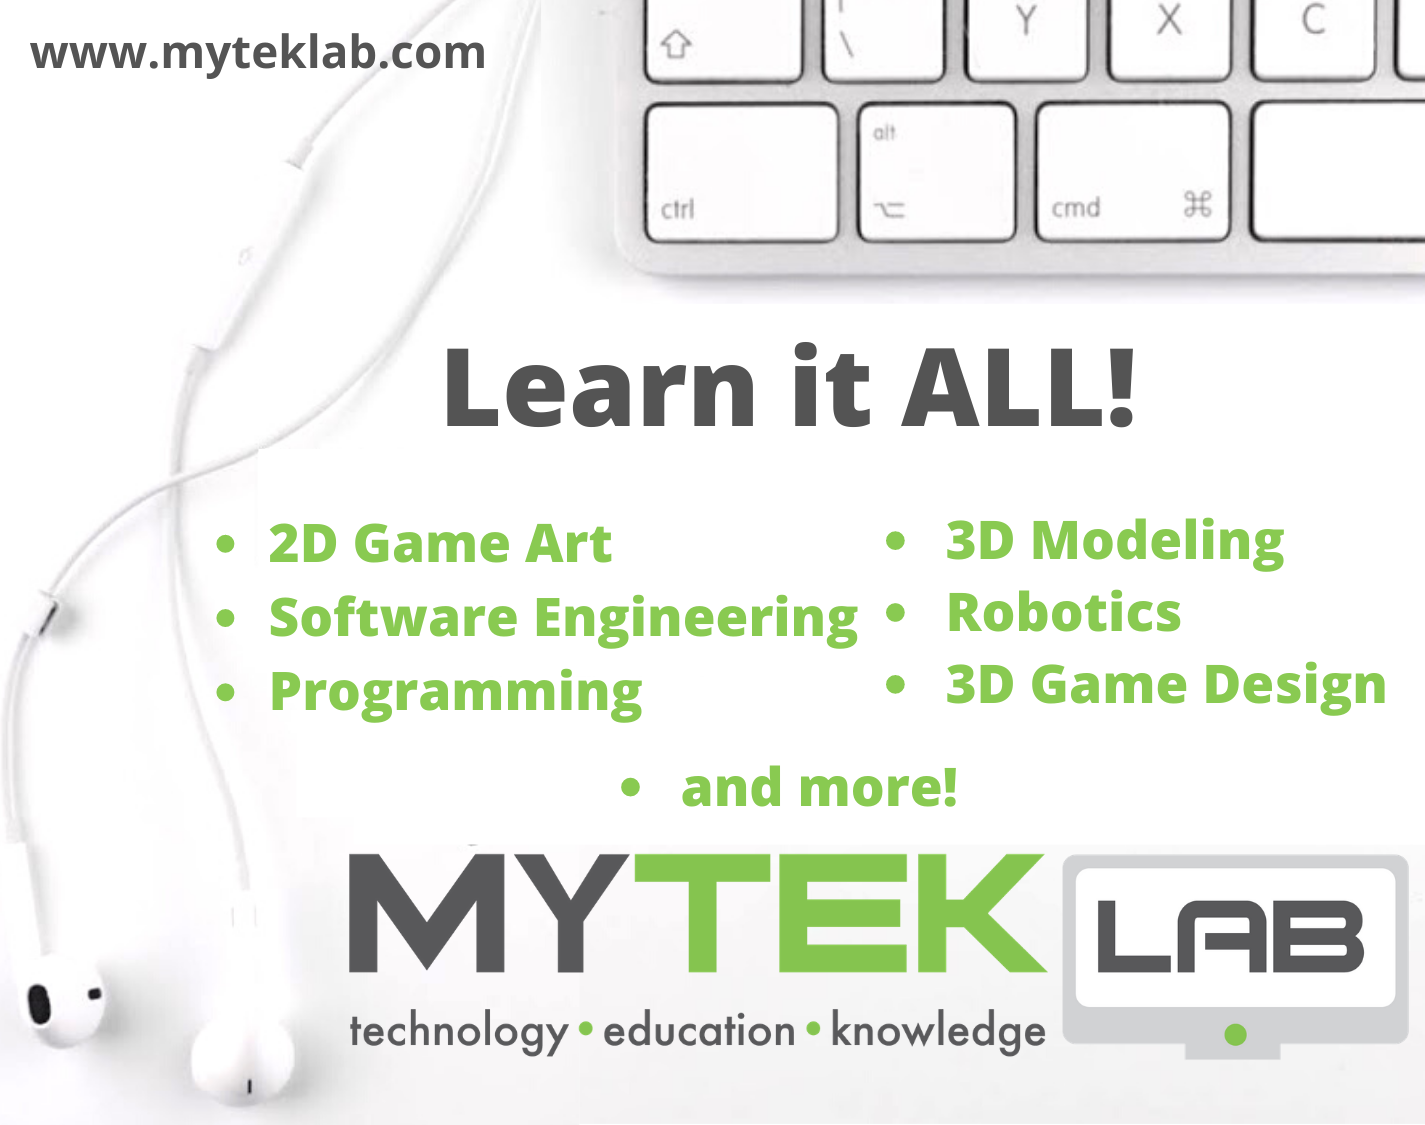 A description of the topics you can learn at MYTEK Lab